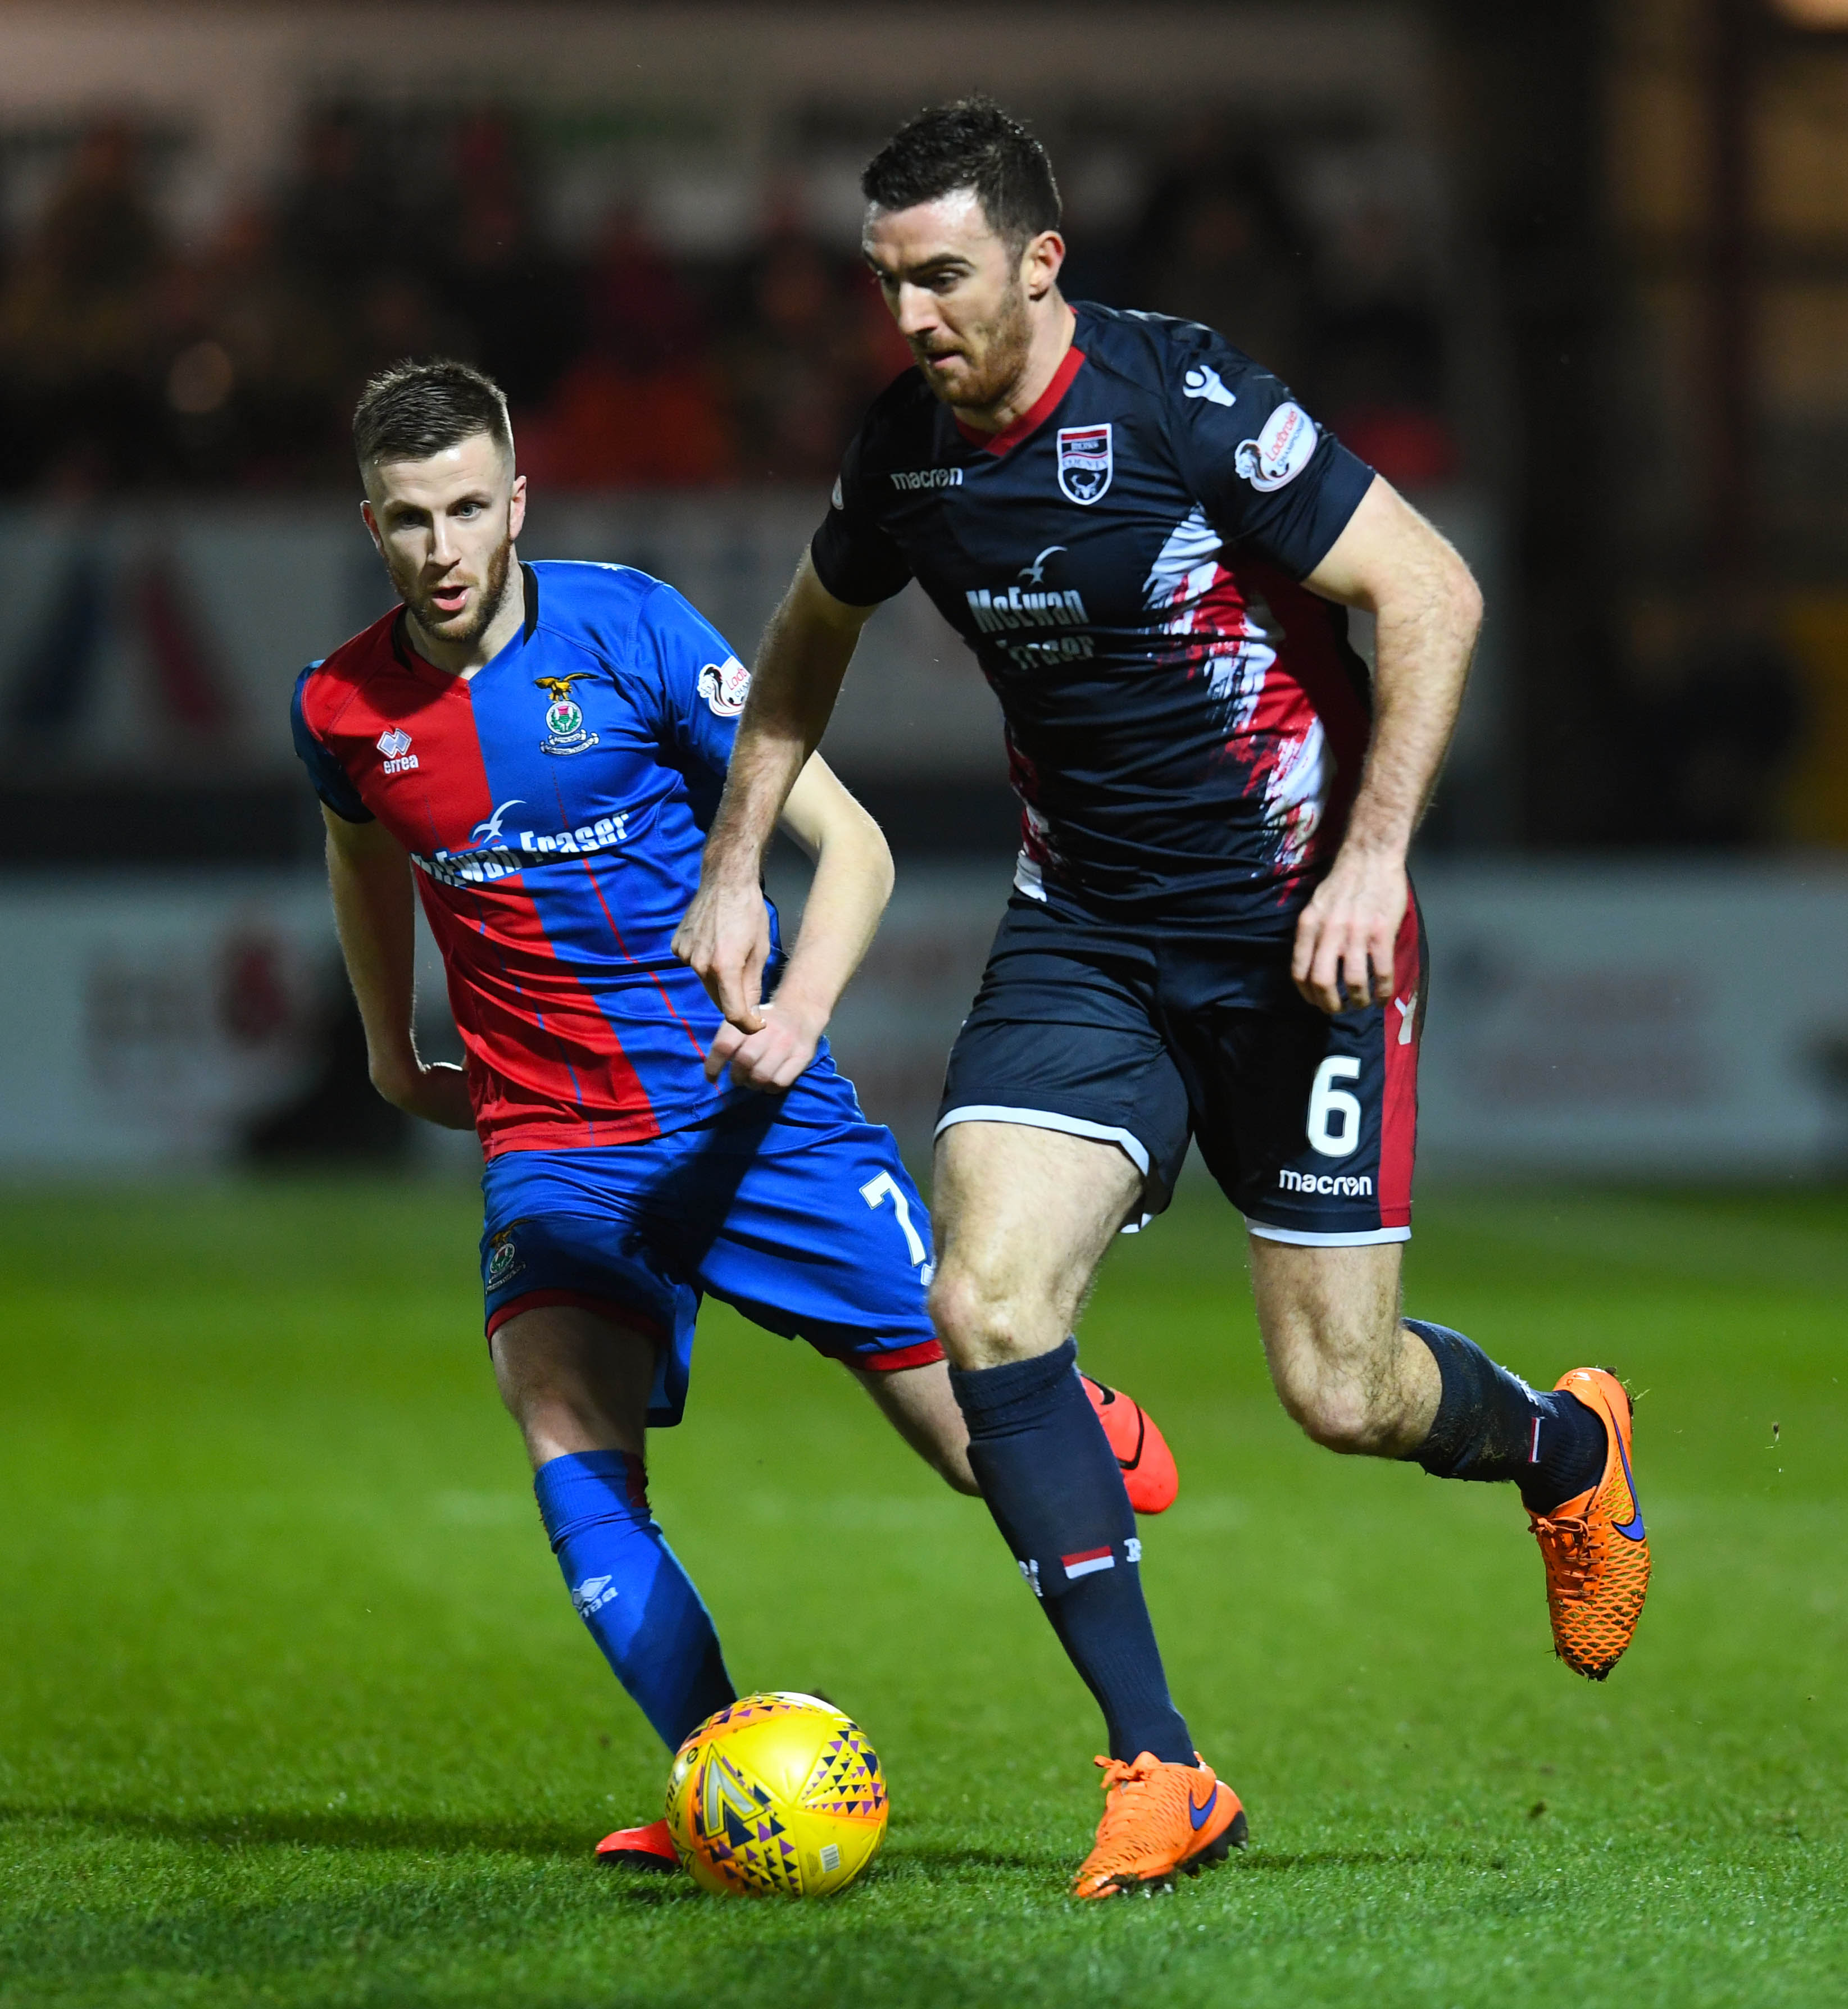 11/02/19 WILLIAM HILL SCOTTISH CUP 5TH ROUND
ROSS COUNTY v INVERNESS CT
THE GLOBAL ENERGY STADIUM - DINGWALL
Ross County's Ross Draper (R) in action with Inverness CT's Liam Polworth.